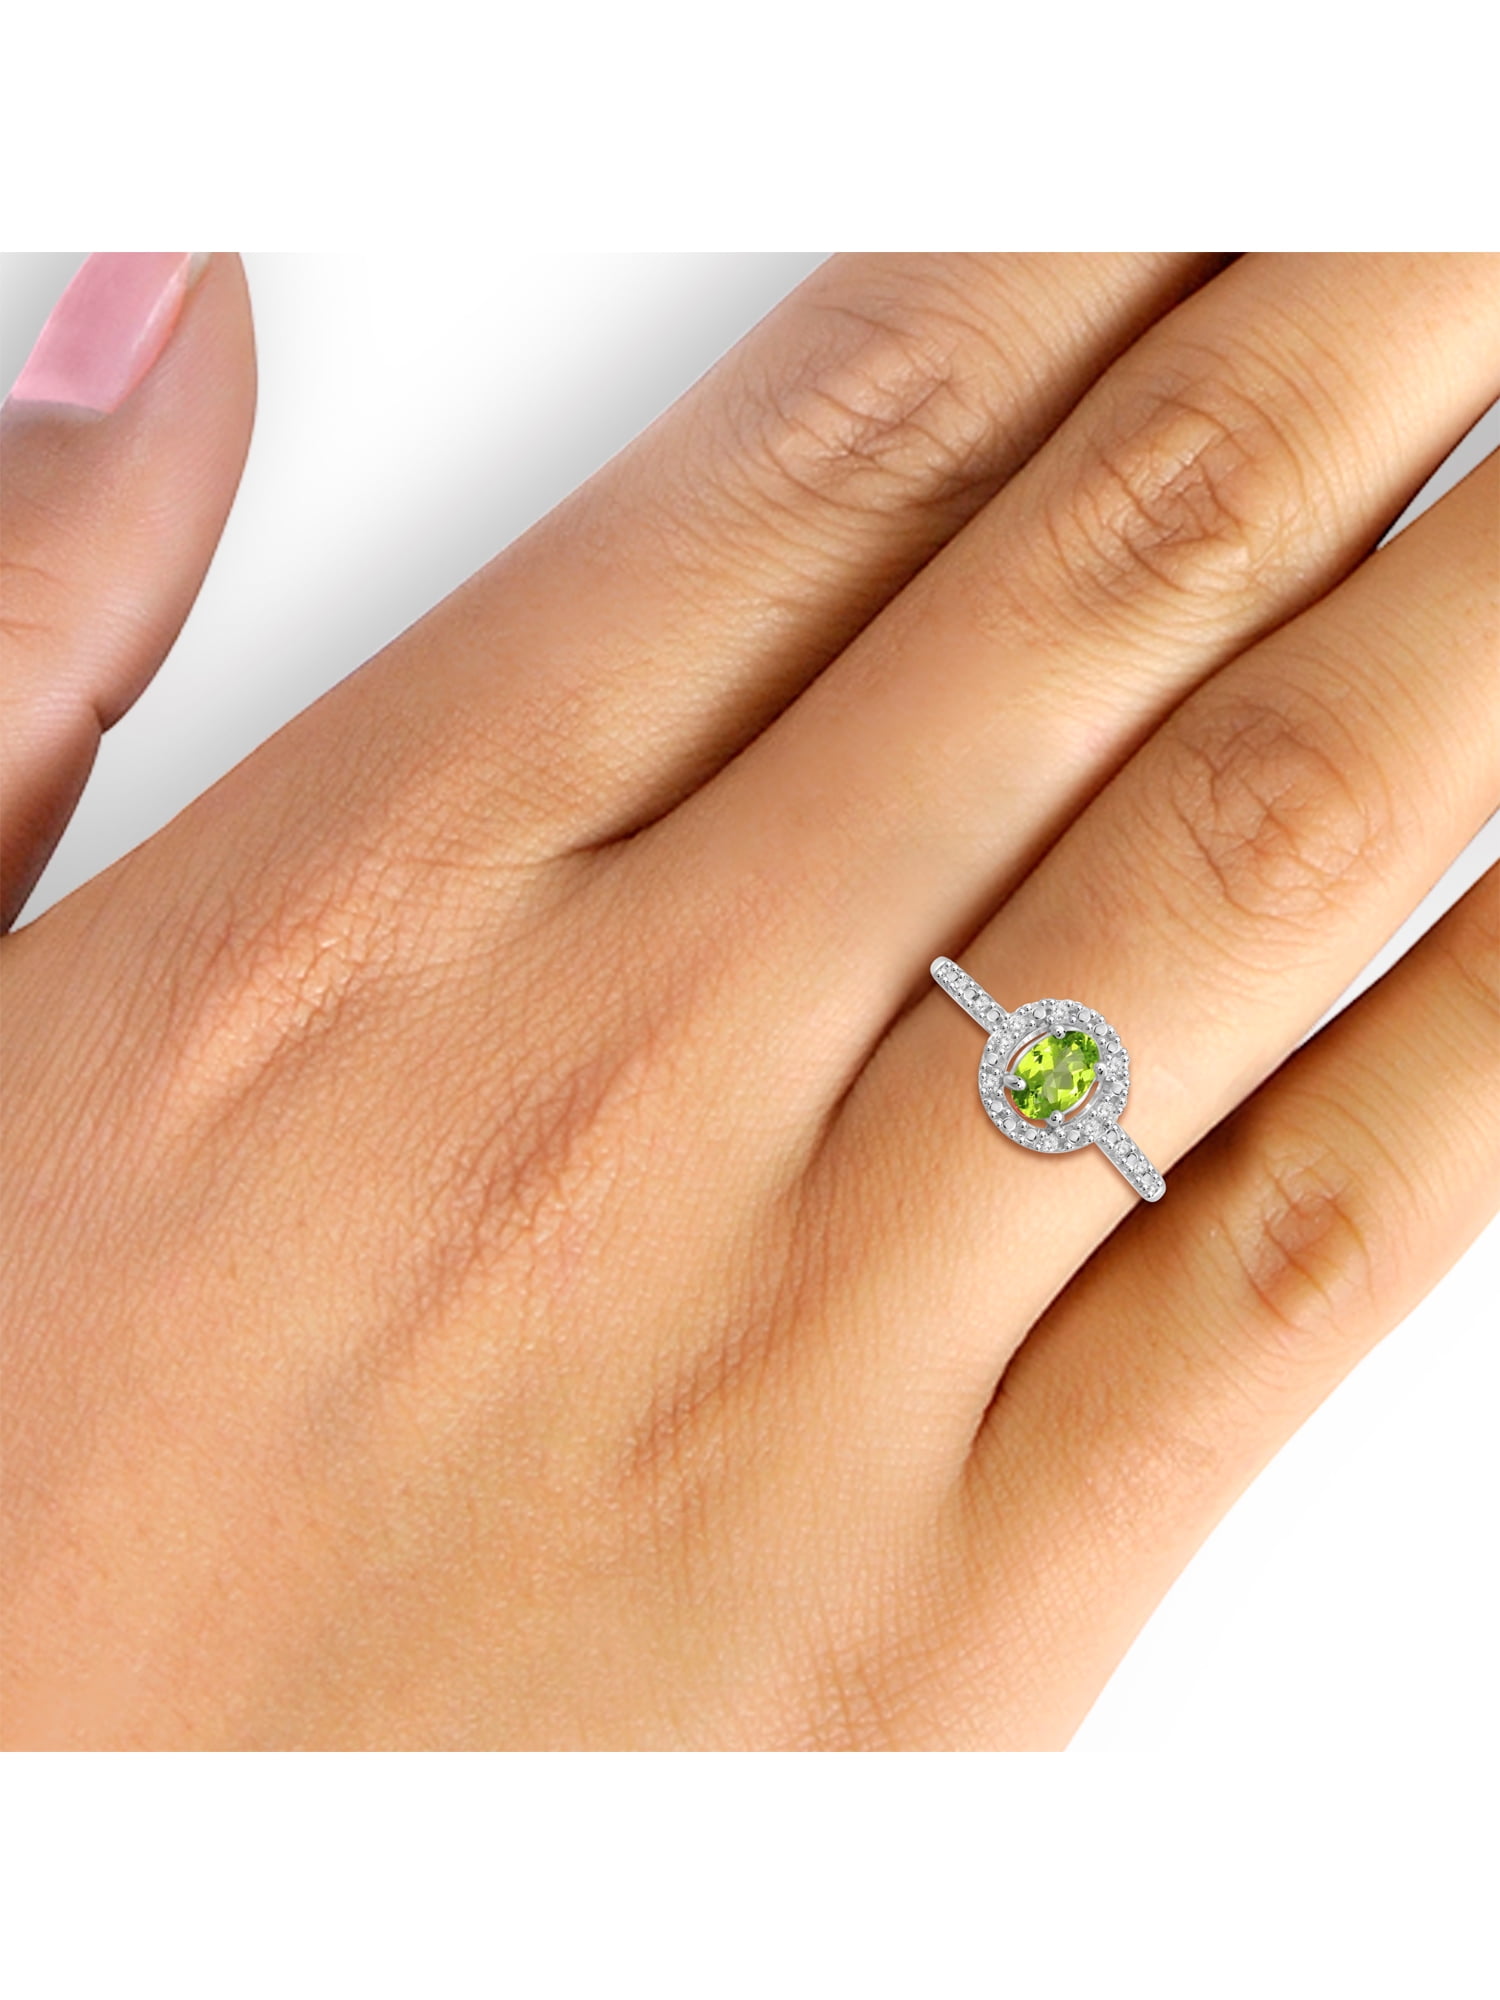 Unique Branch and Natural Peridot Ring - Etsy | Peridot engagement rings,  Rose gold ring etsy, Peridot ring